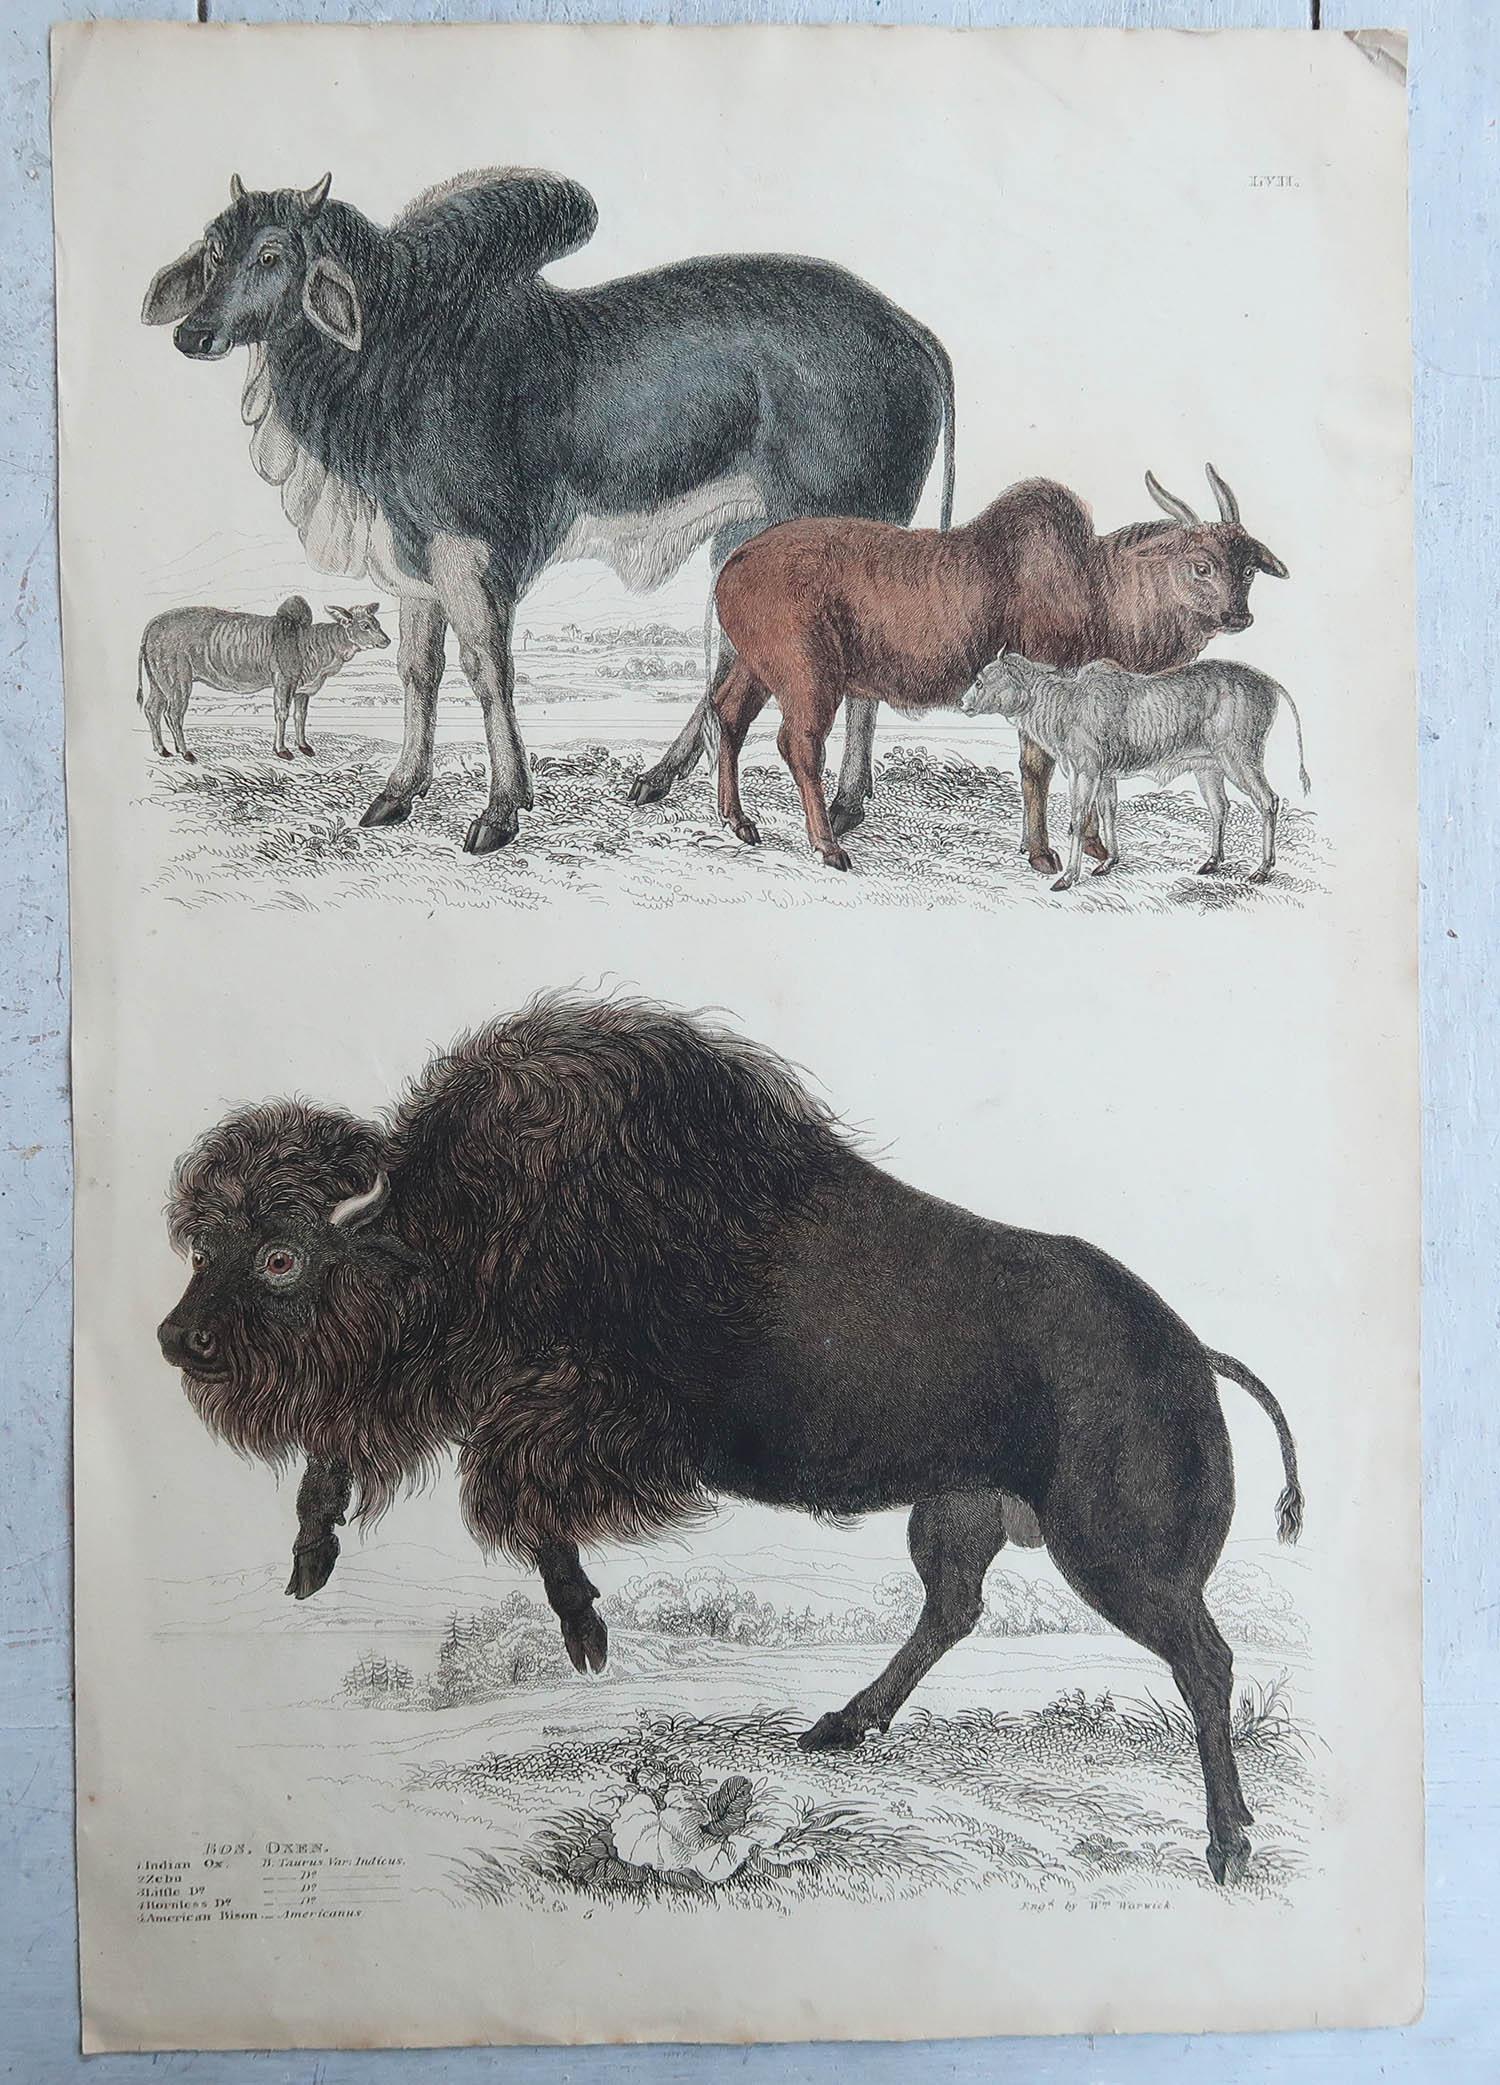 history of american bison